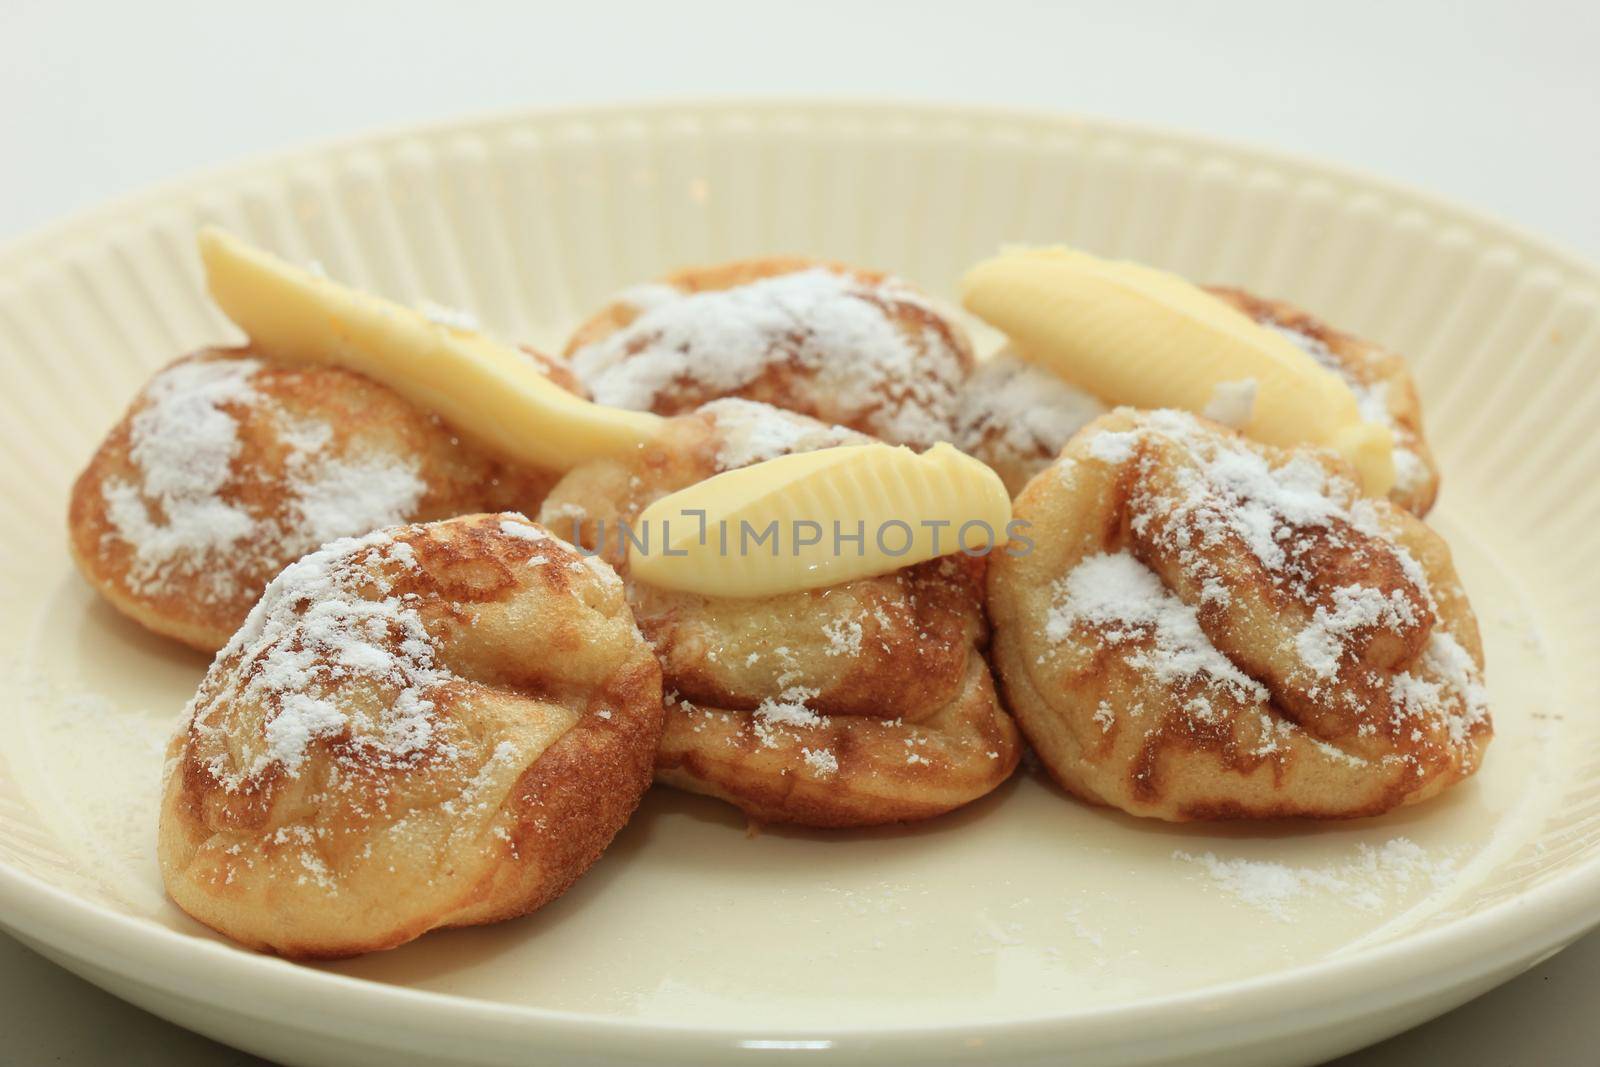 Poffertjes, Dutch small, fluffy pancakes, served with powdered sugar and butter.